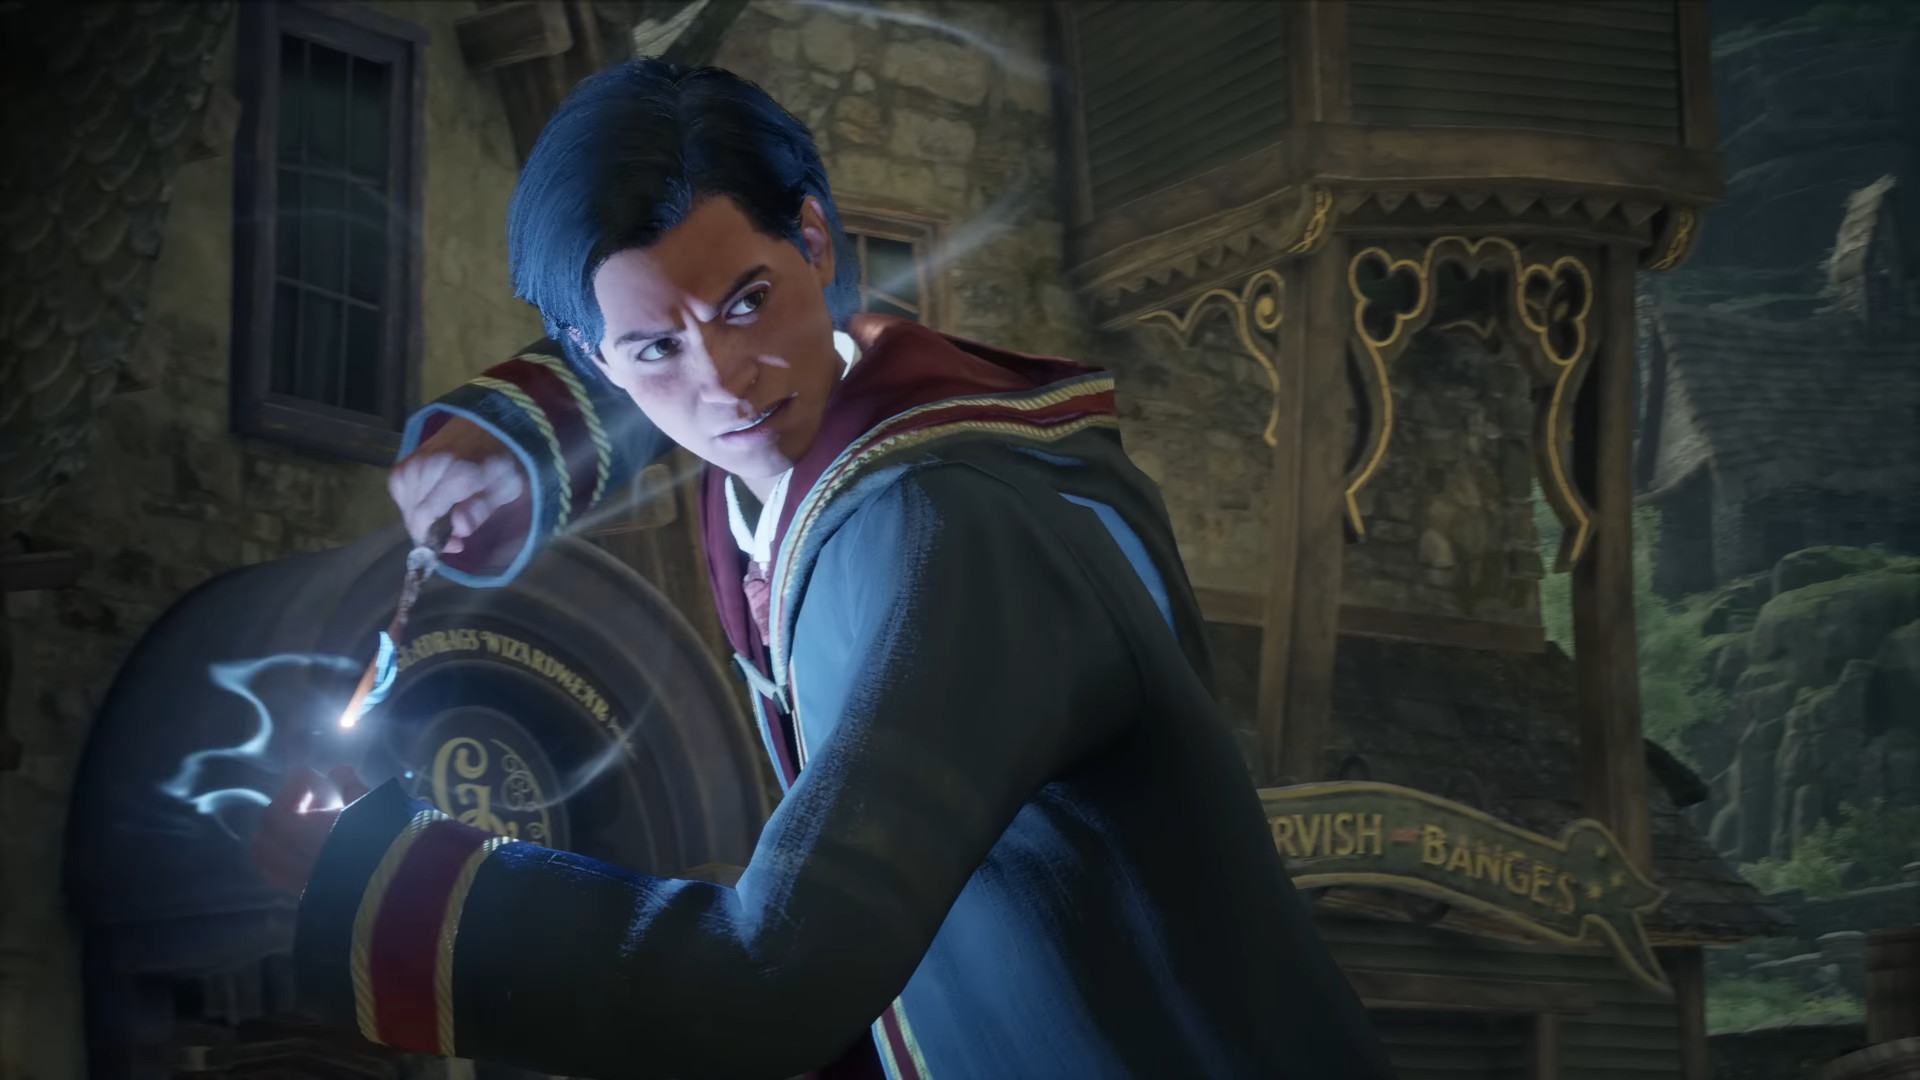 Hogwarts Legacy PC system requirements need some pretty powerful